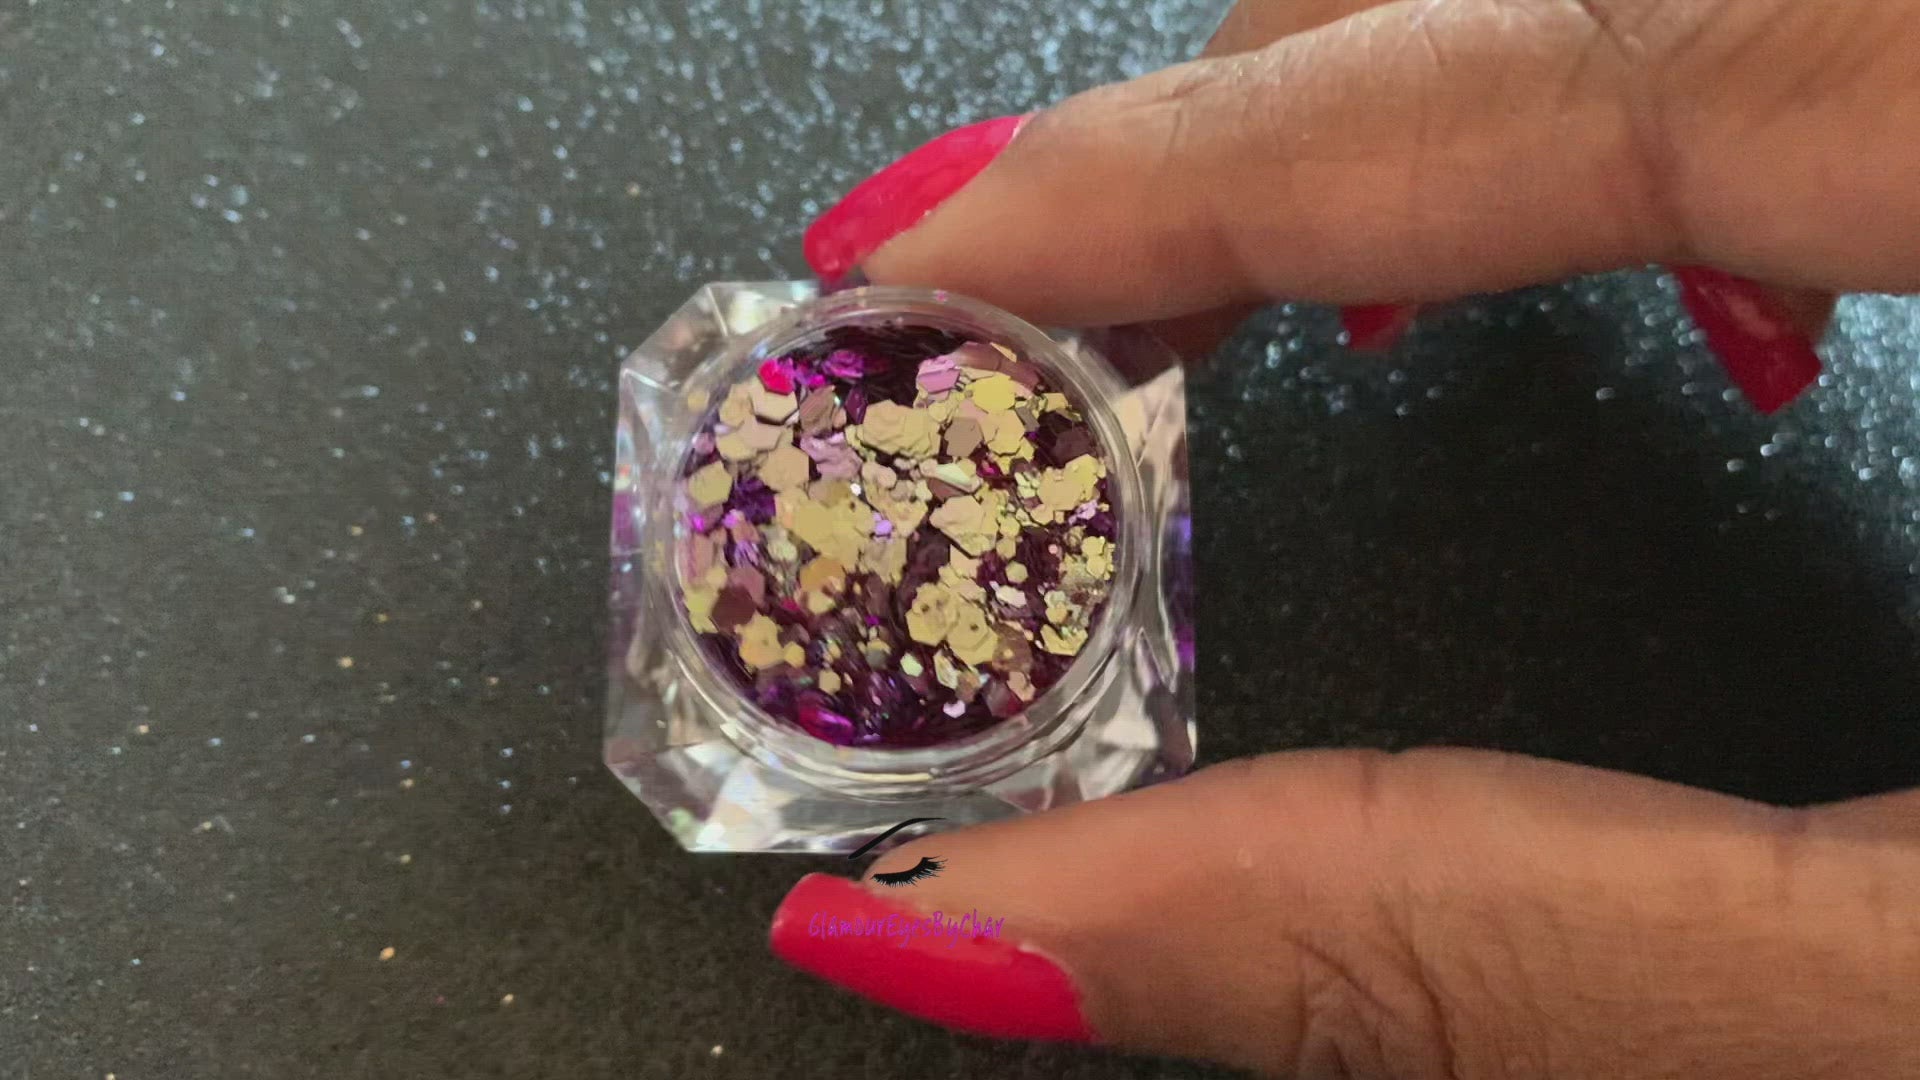 This chameleon glitter is called Daydream and is part of the super chunky glitter collection. It consists of purple glitter with a pale gold unique colour shifting sparkle. Daydream can be used for your face, body, hair and nails.  Comes in 5g jars only.